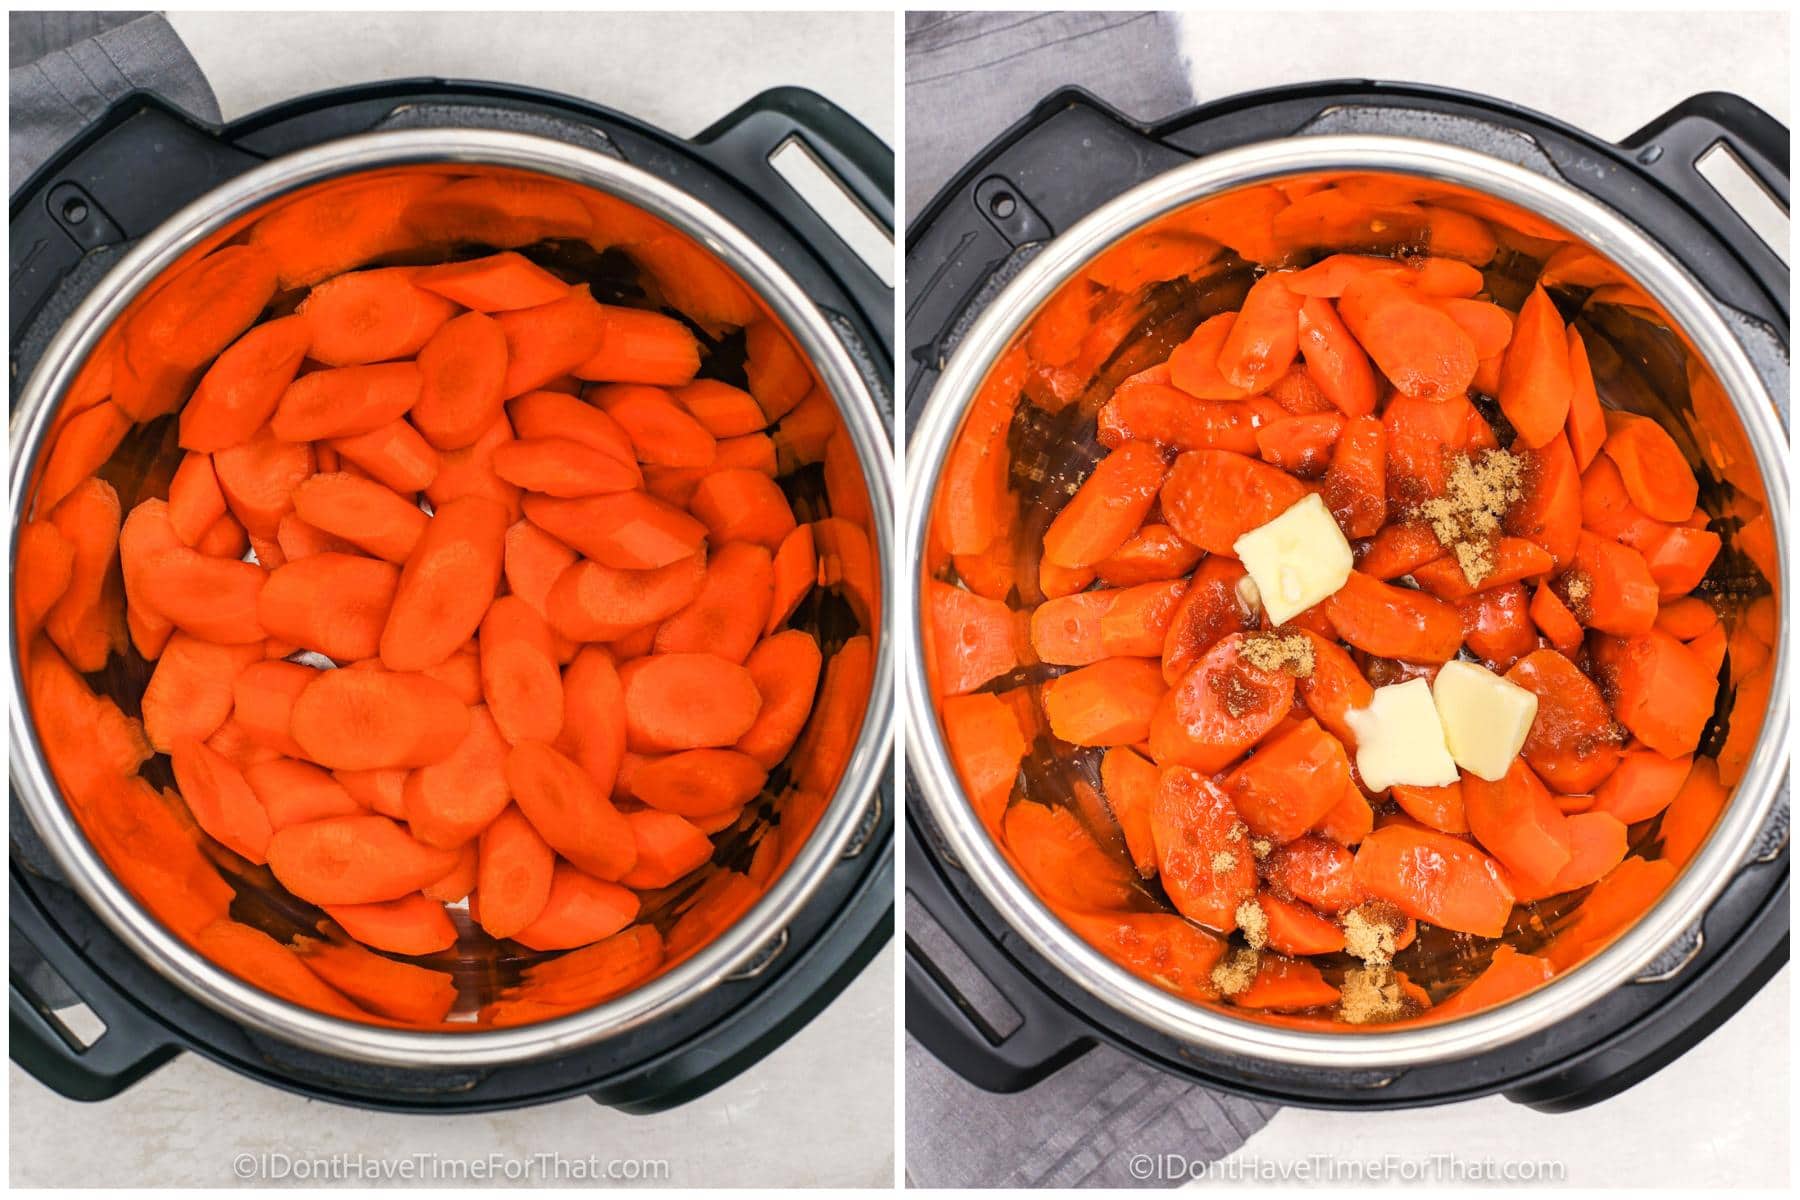 process of adding ingredients to pot to make Instant Pot Carrots